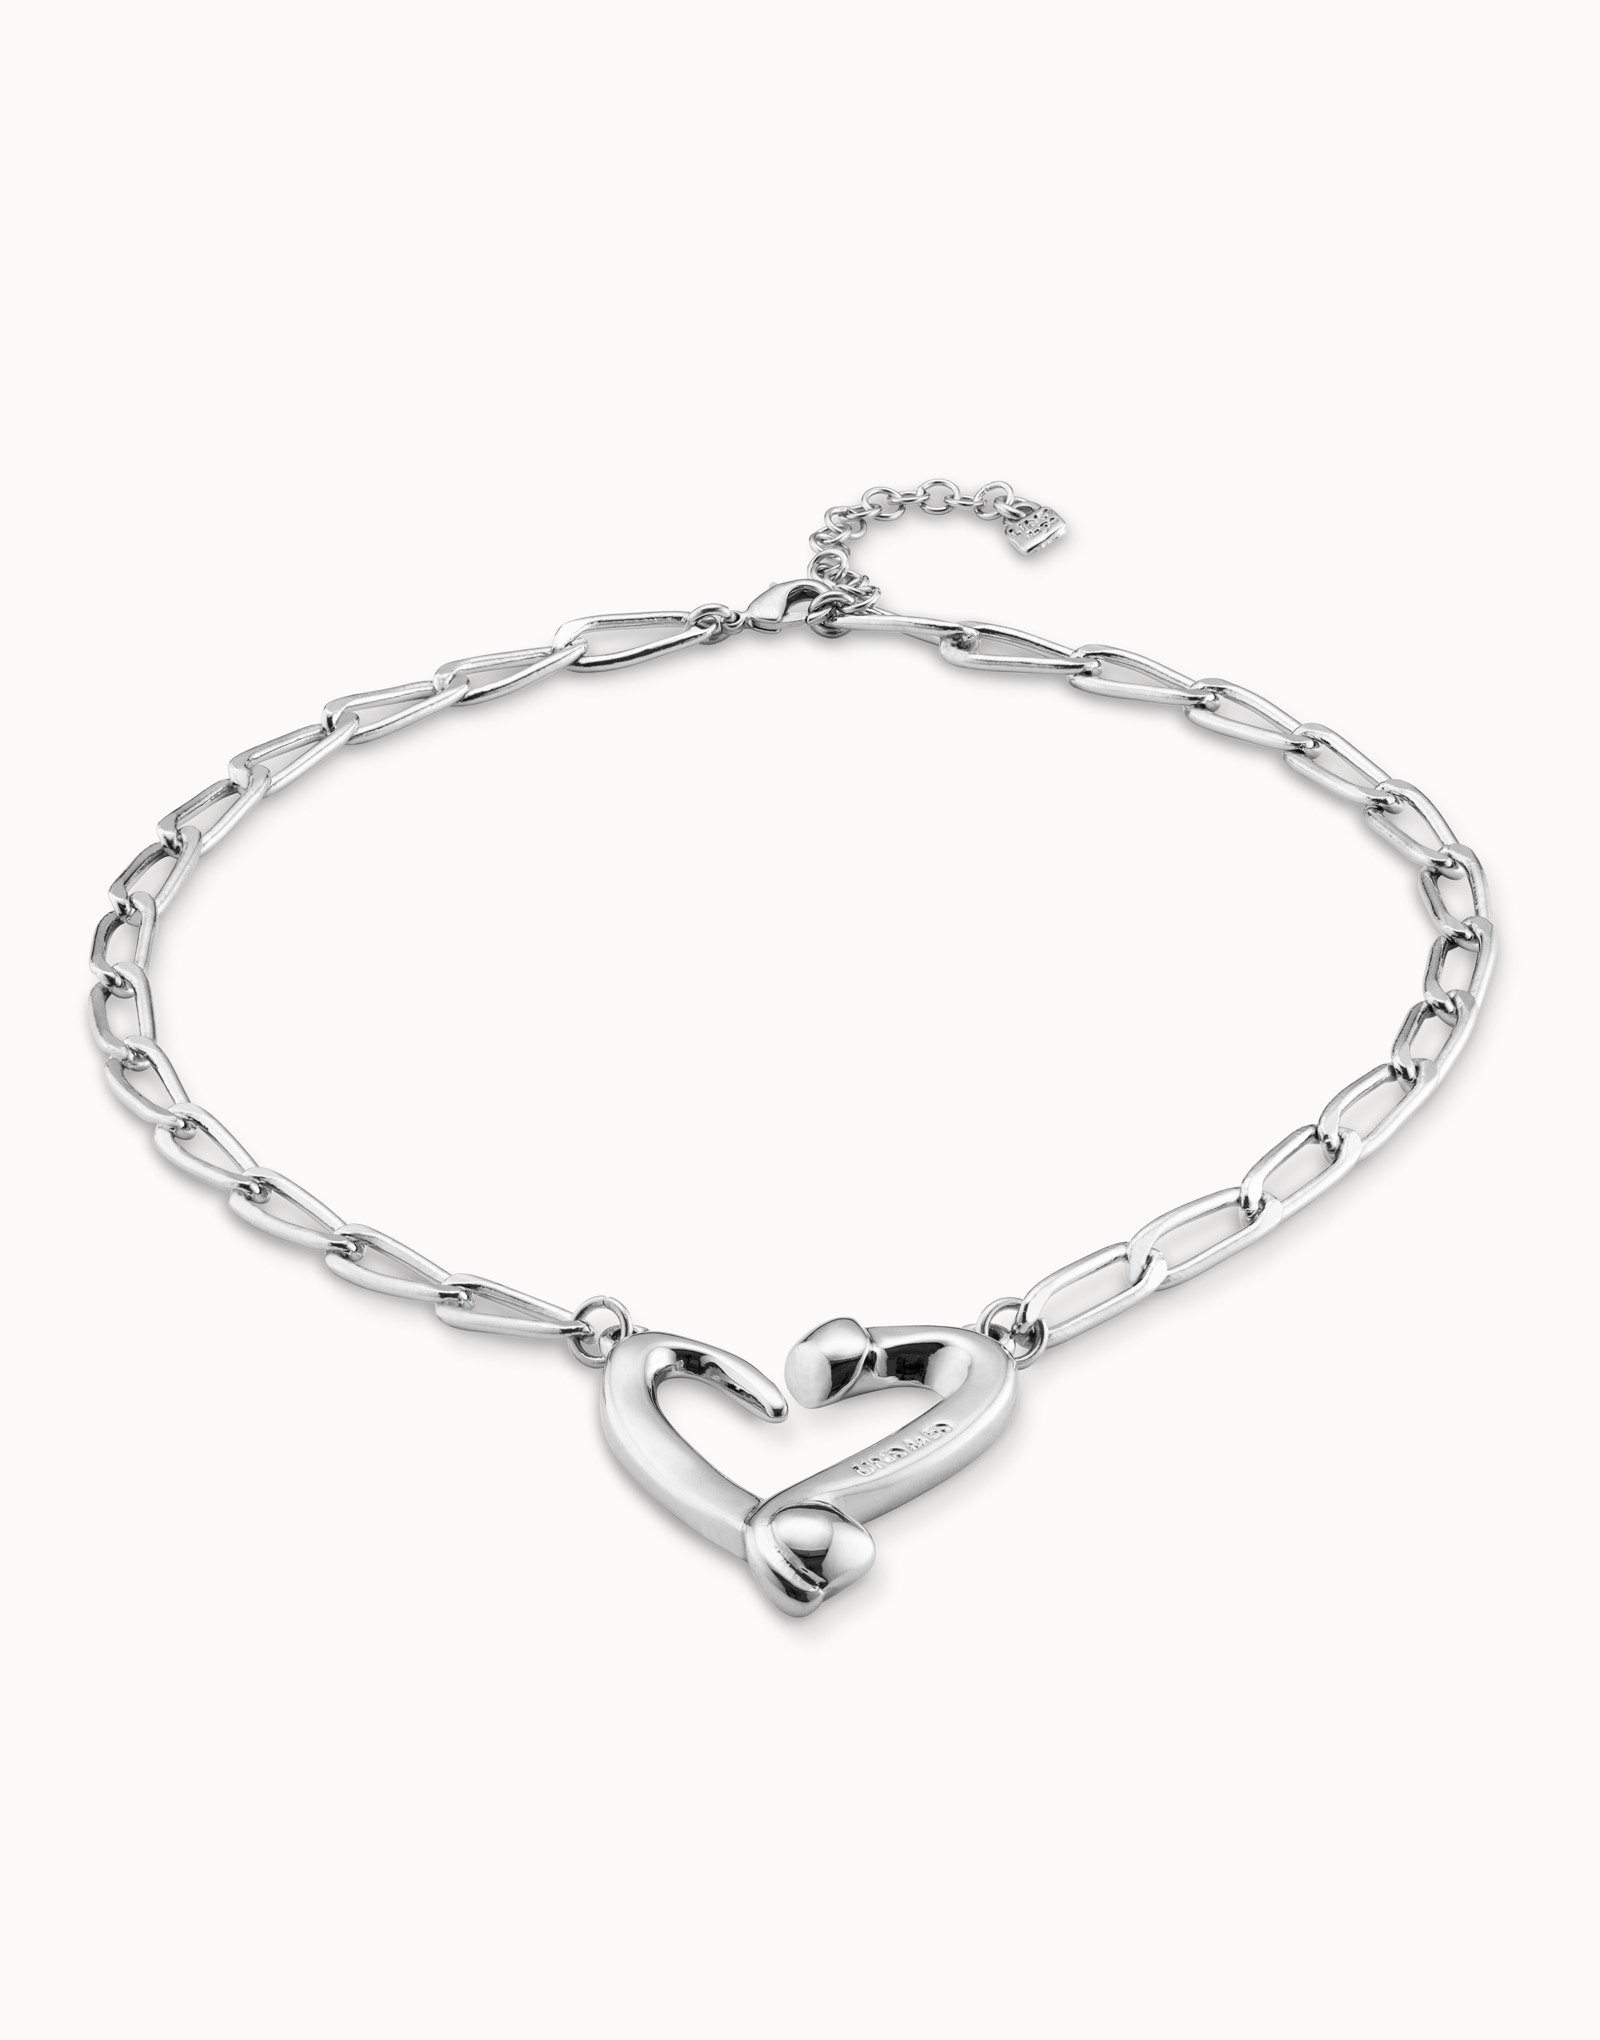 Ciondolo d’argento Sterling a maglie e con cuore, Argent, large image number null